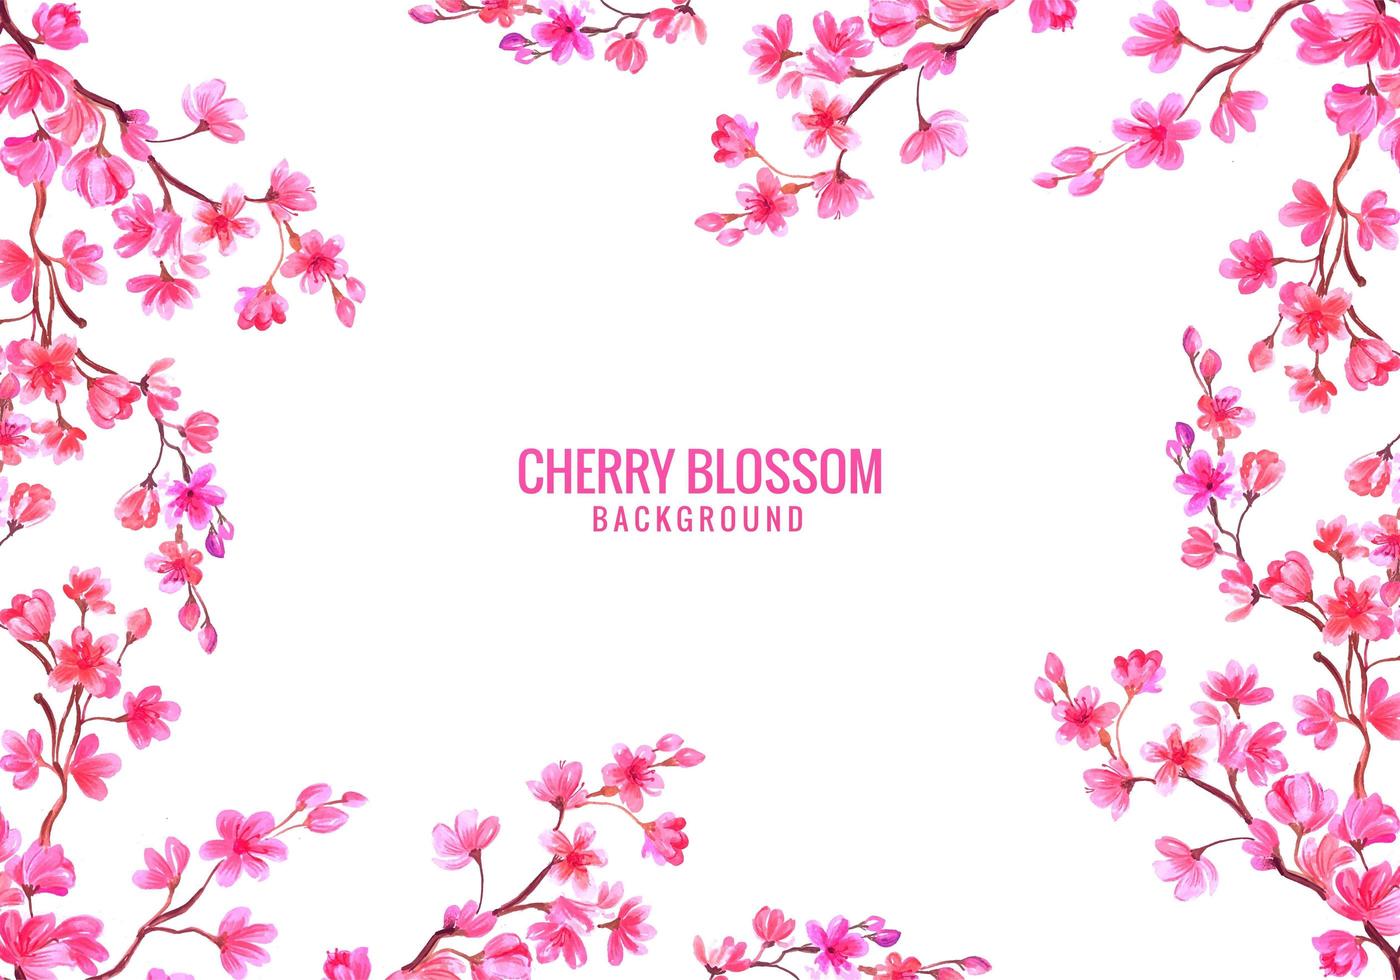 Cherry Blossom Card Background vector